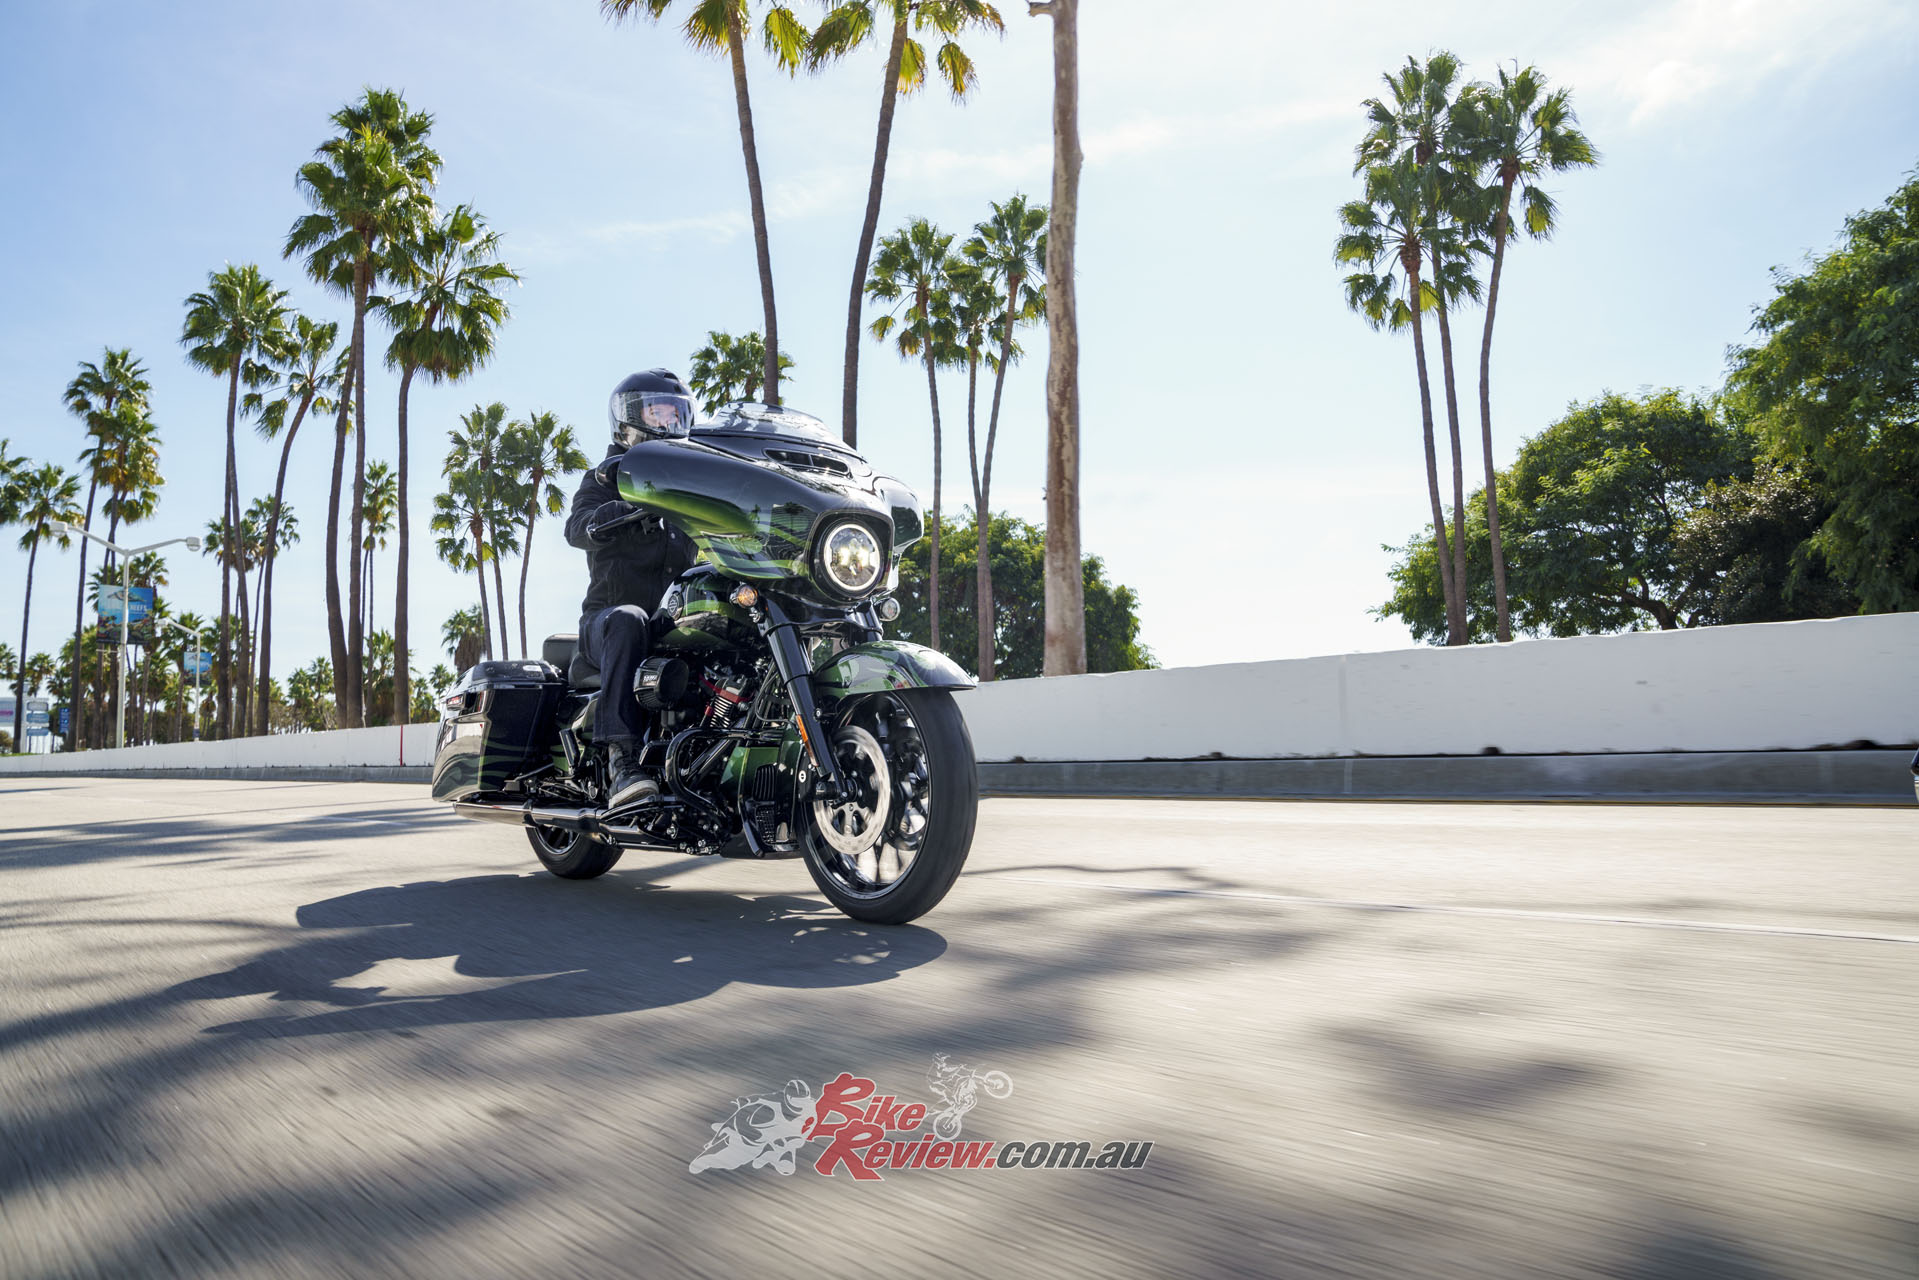 The 2022 CVO range from Harley-Davidson is filled with premium features and eye catching paint. Check all the new models out....